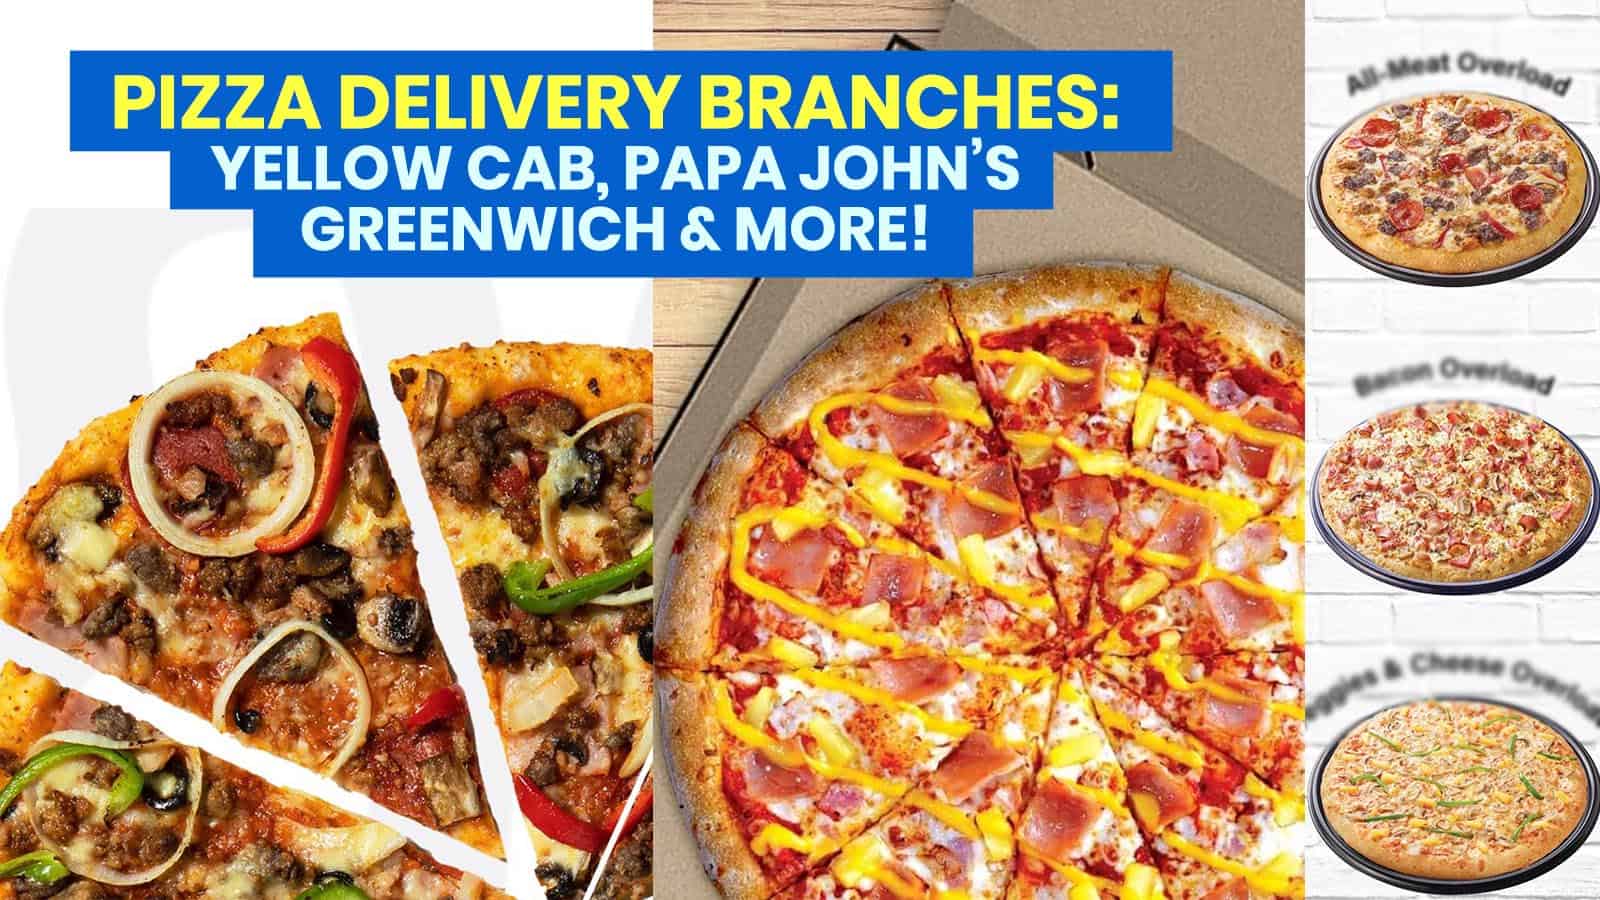 PIZZA DELIVERY: Open Branches of Yellow Cab, Papa John’s, Greenwich, Pizza Hut & More!